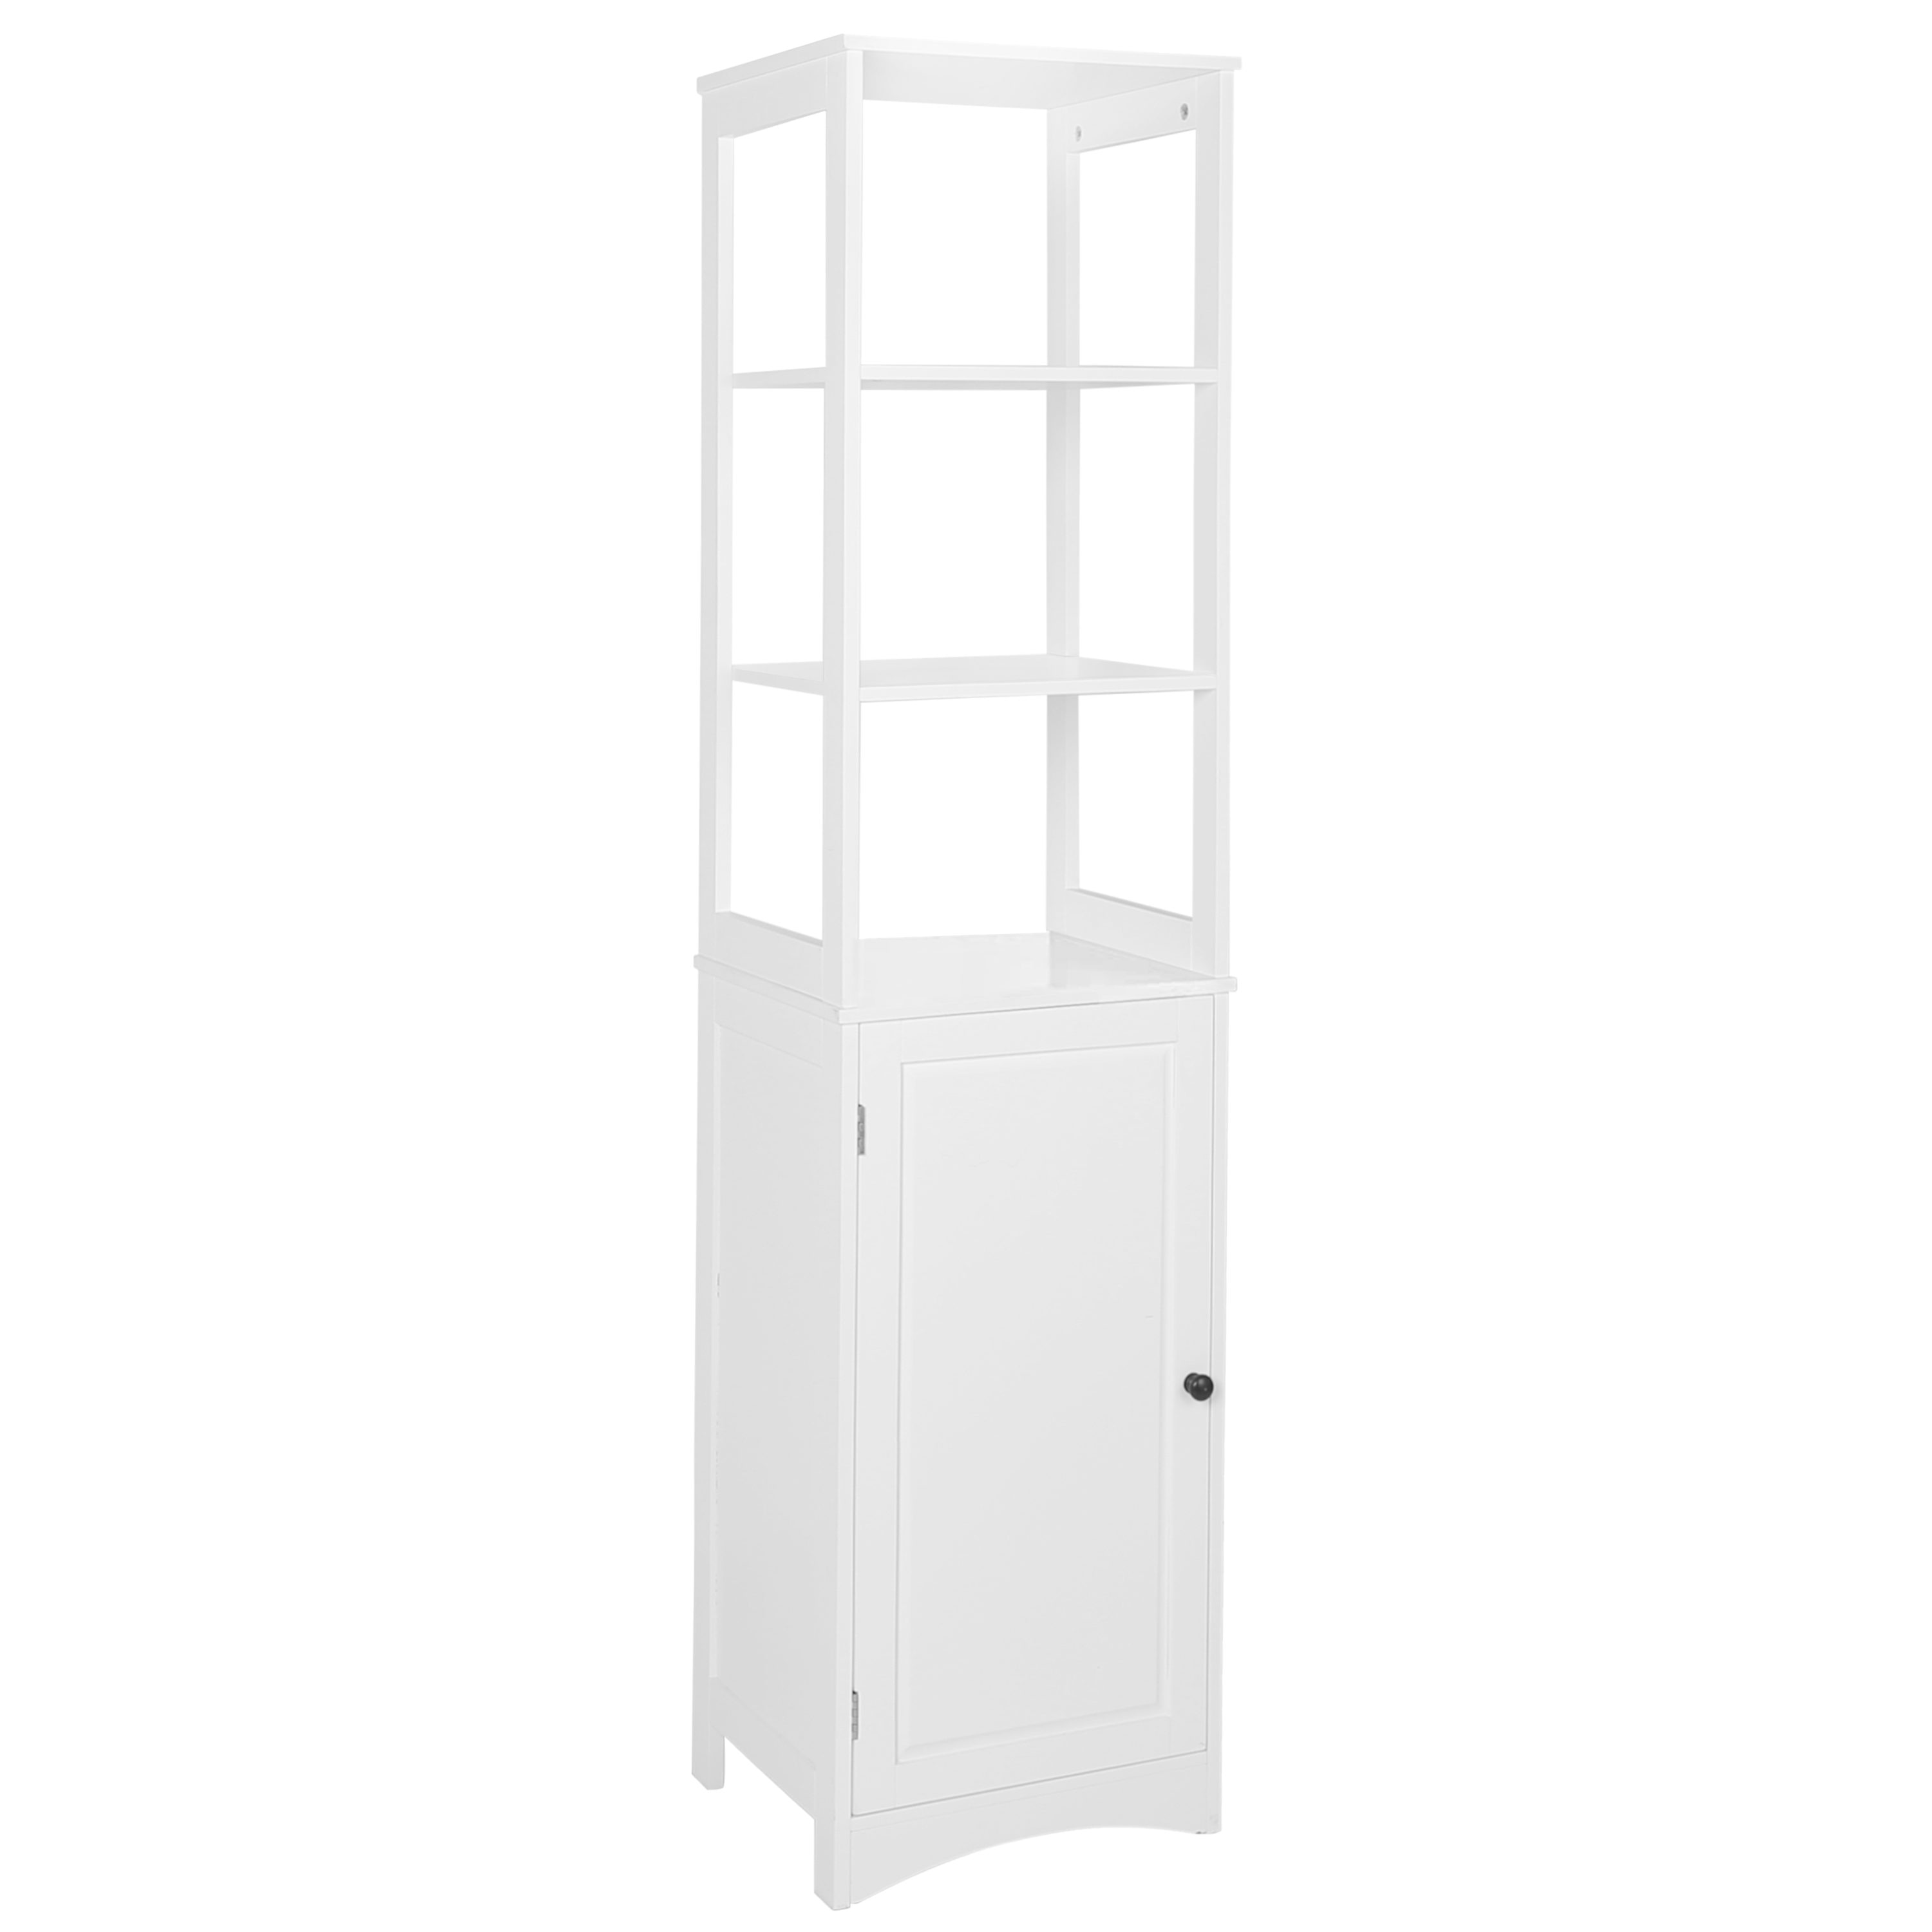 VEIKOUS 15.7-in x 63.2-in x 12.6-in White Freestanding Linen Cabinet at ...